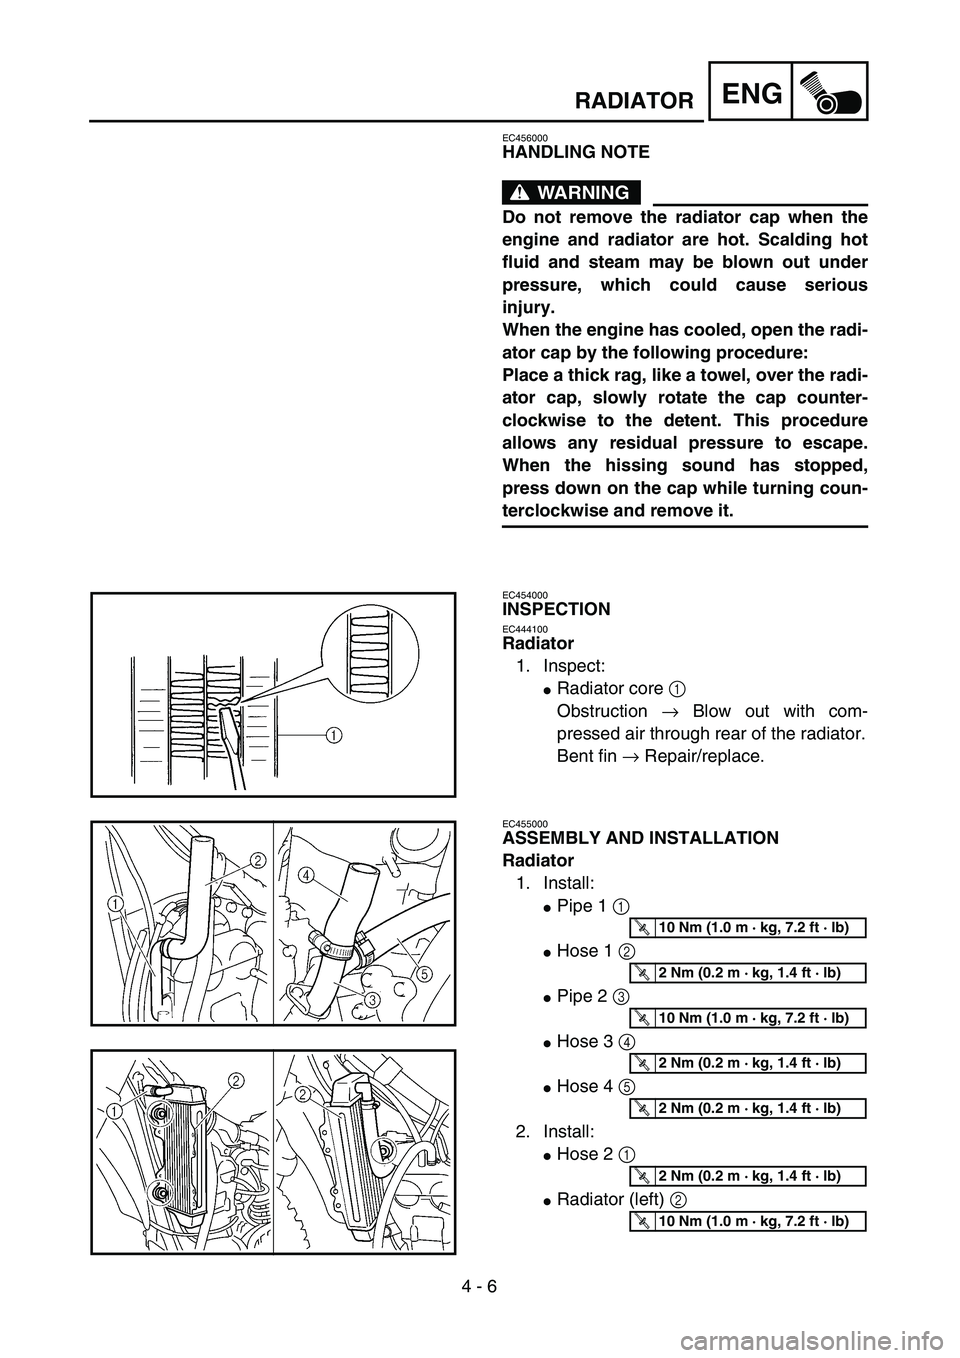 YAMAHA WR 426F 2002  Owners Manual 4 - 6
ENGRADIATOR
EC456000
HANDLING NOTE
WARNING
Do not remove the radiator cap when the
engine and radiator are hot. Scalding hot
fluid and steam may be blown out under
pressure, which could cause se